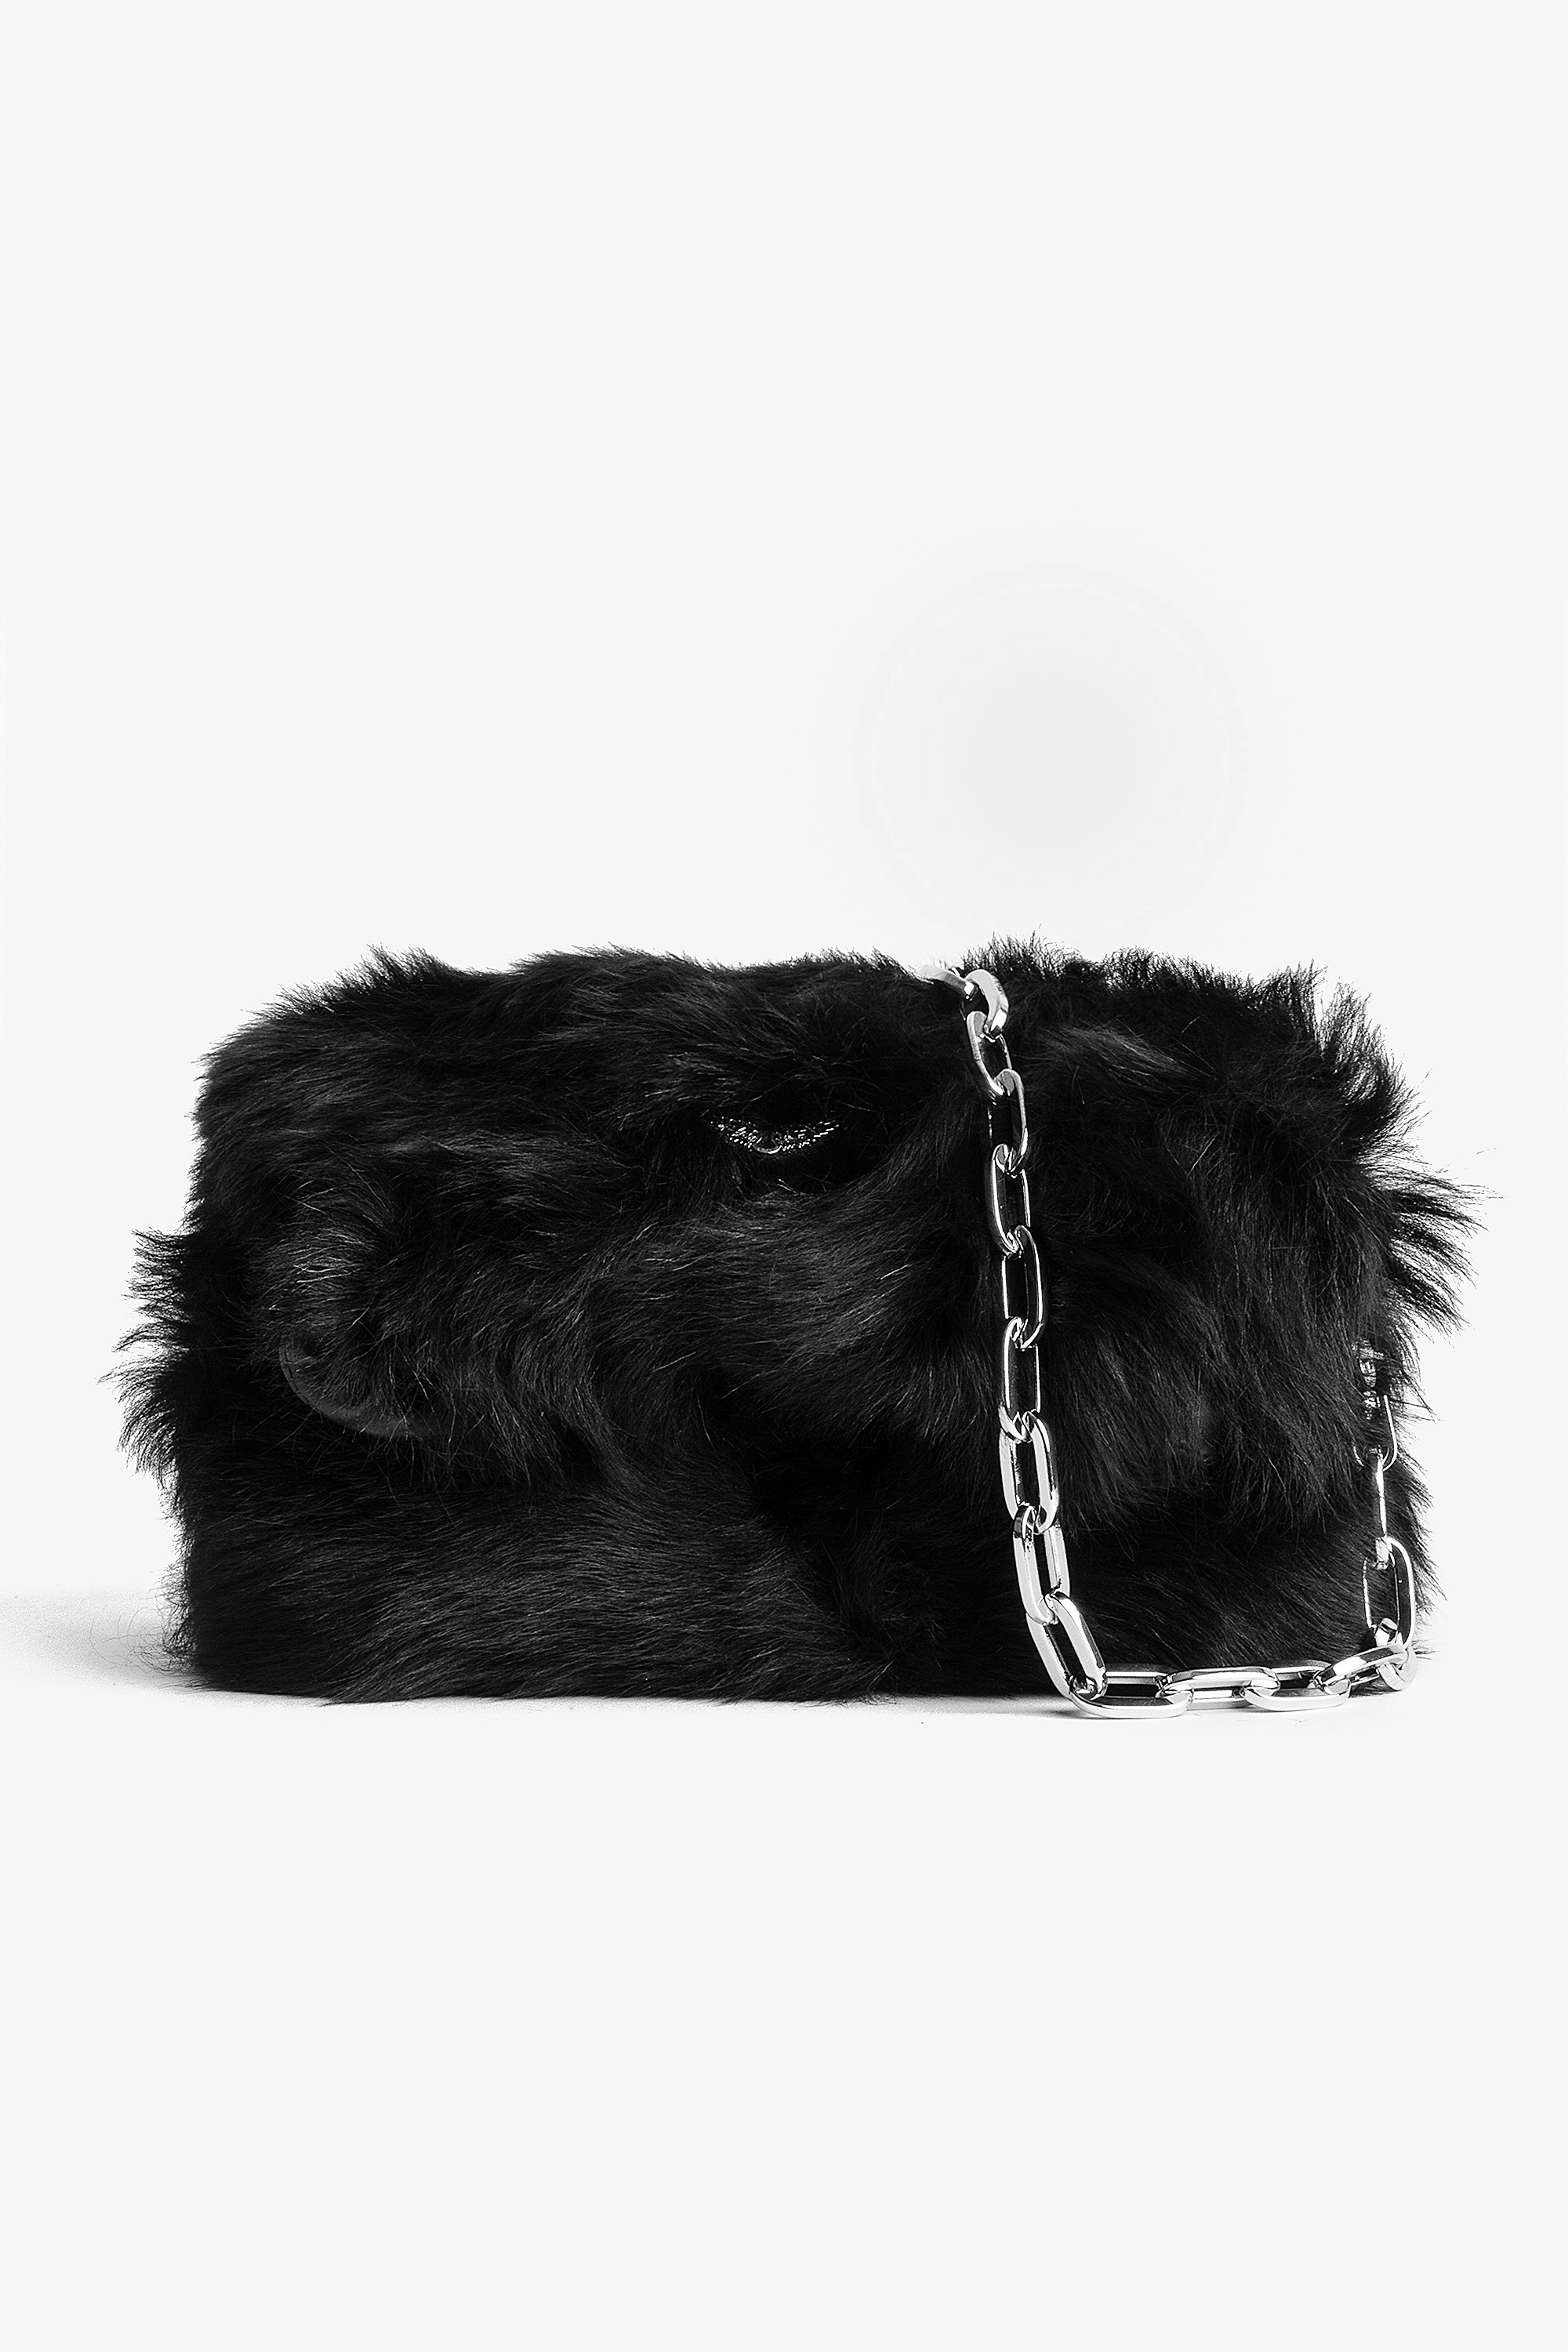 Rockyssime Bag Women’s clutch in black faux fur with gold-tone and metal chain